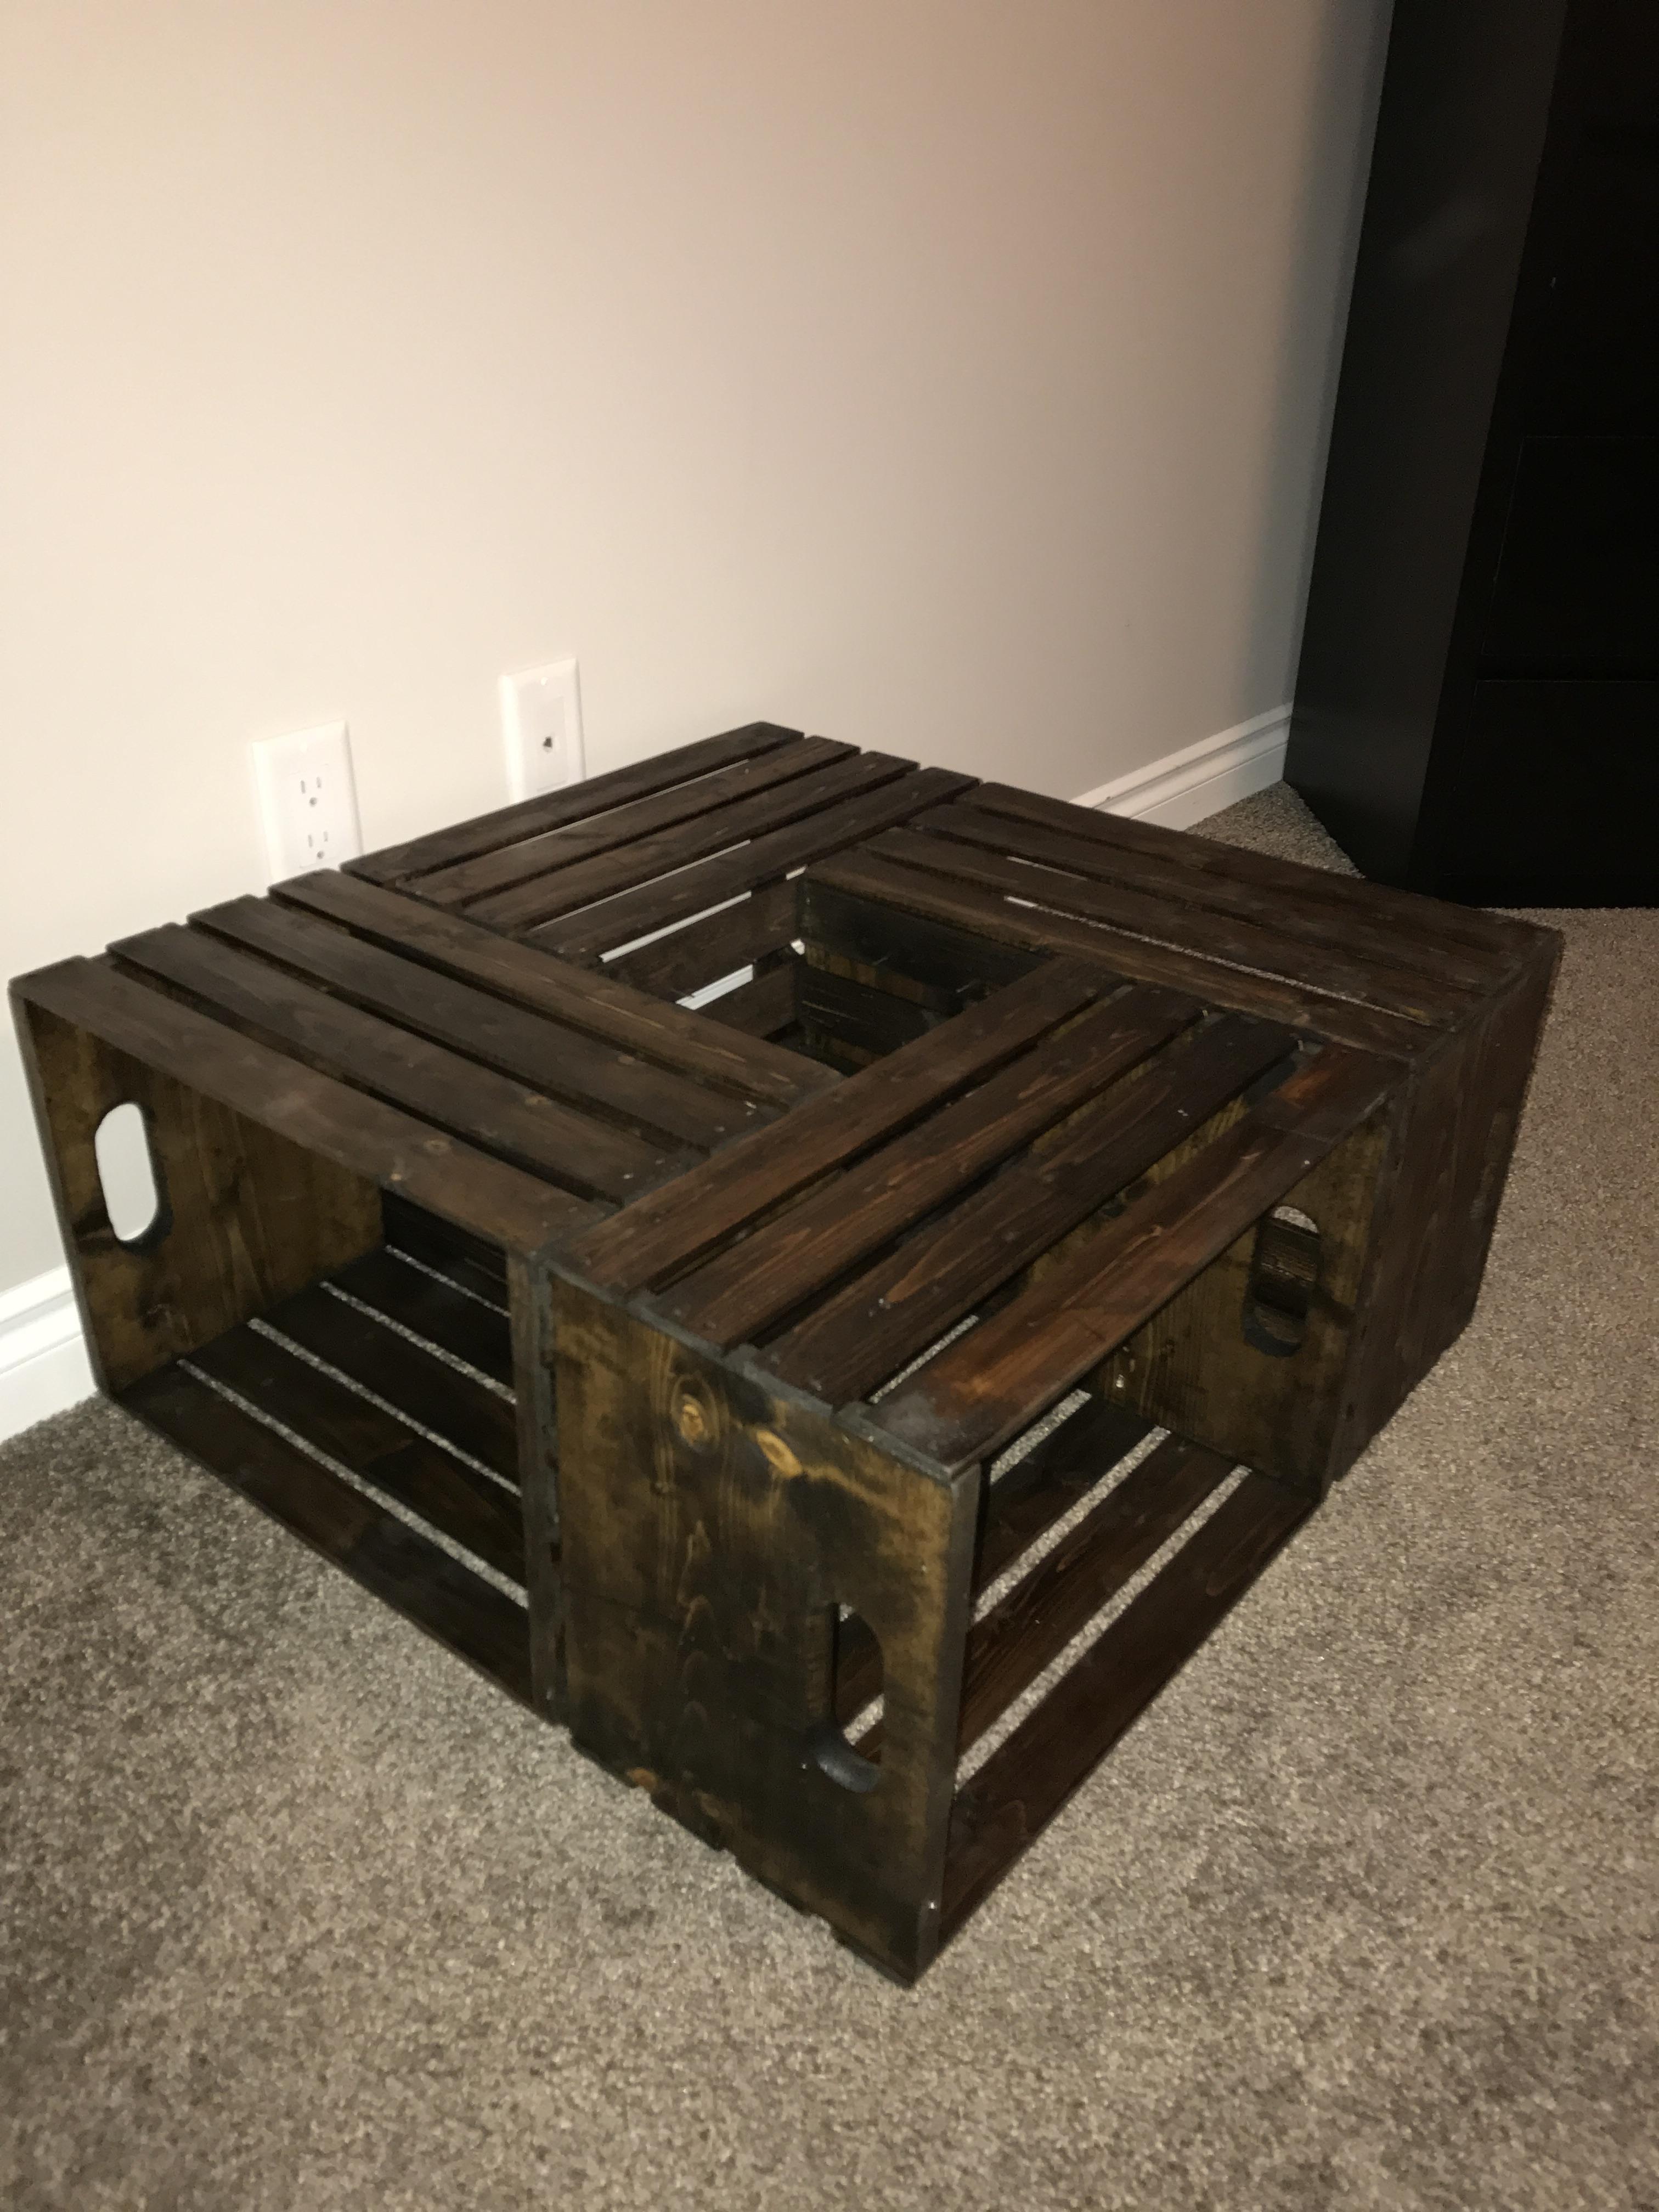 diy-coffee-crate-table